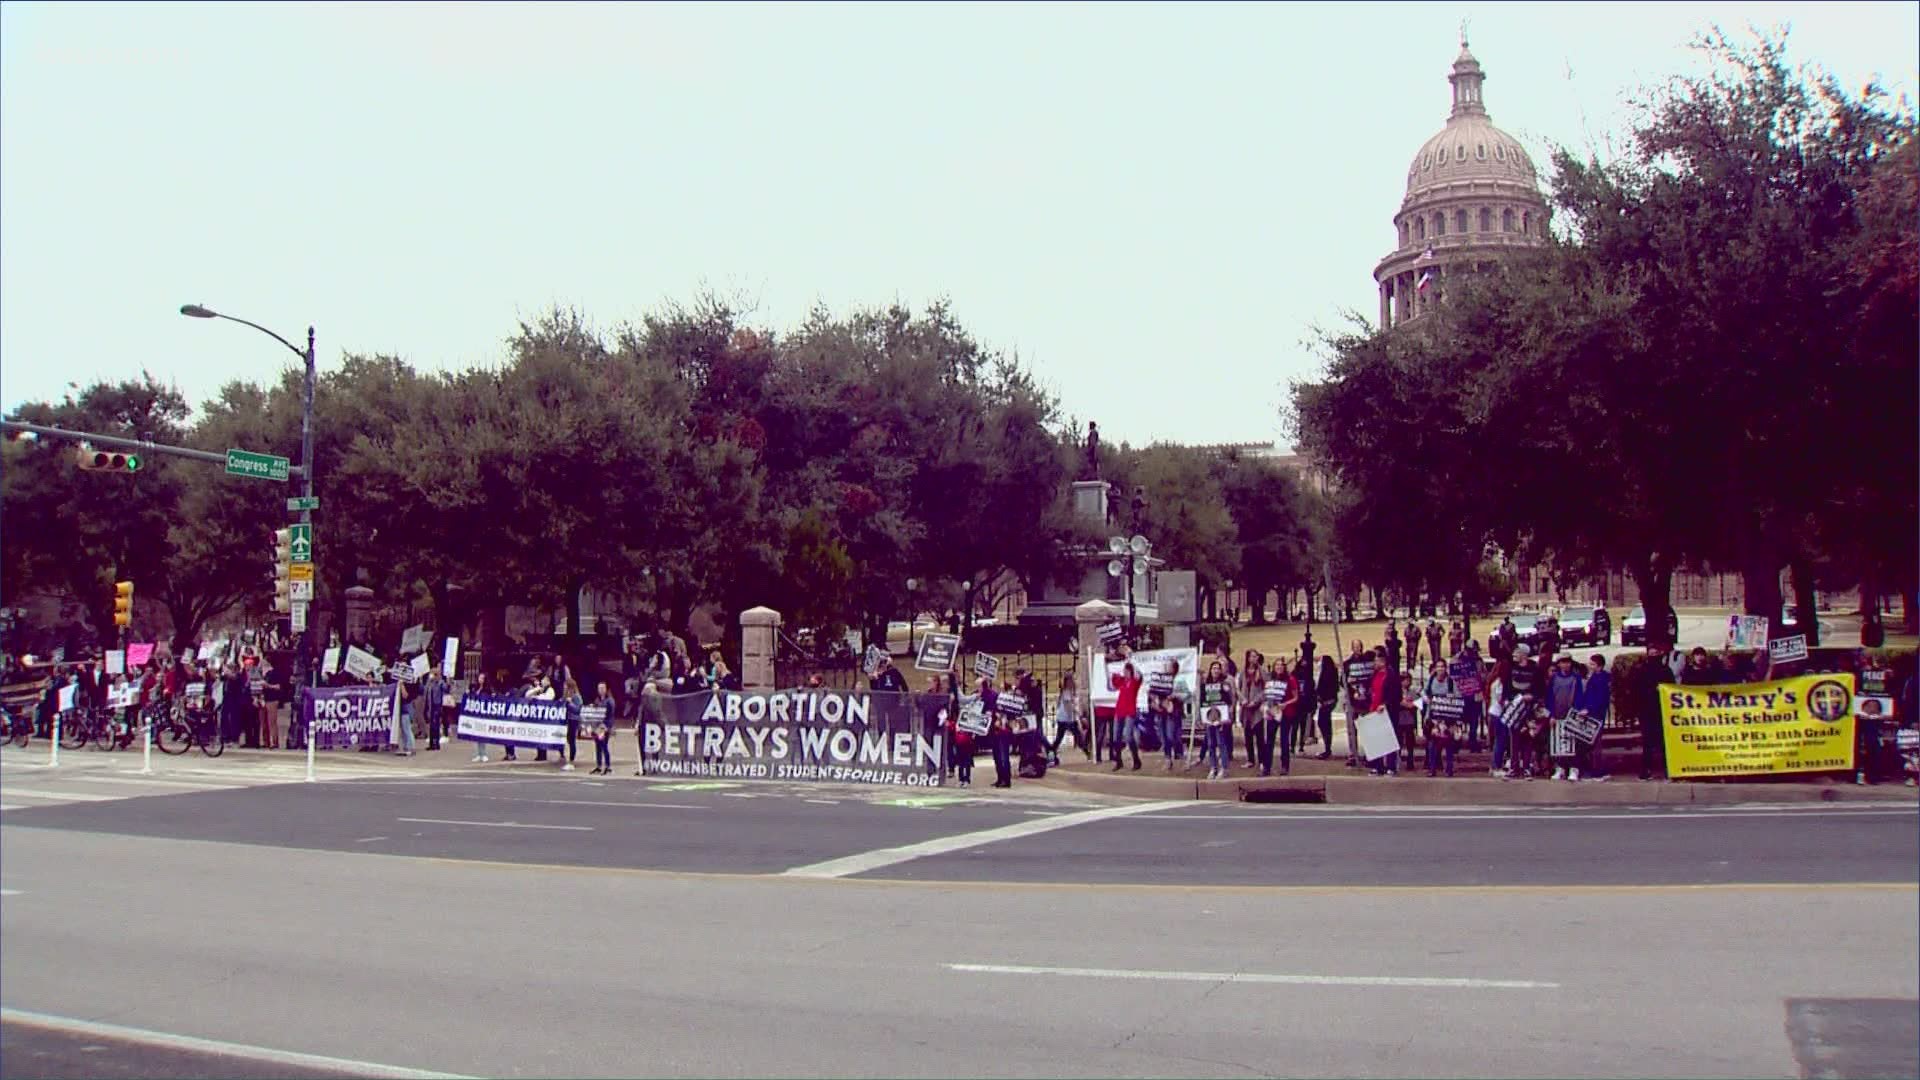 The Rally for Life was held at the Texas State Capitol on Saturday. A group of counter-protesters also showed up.